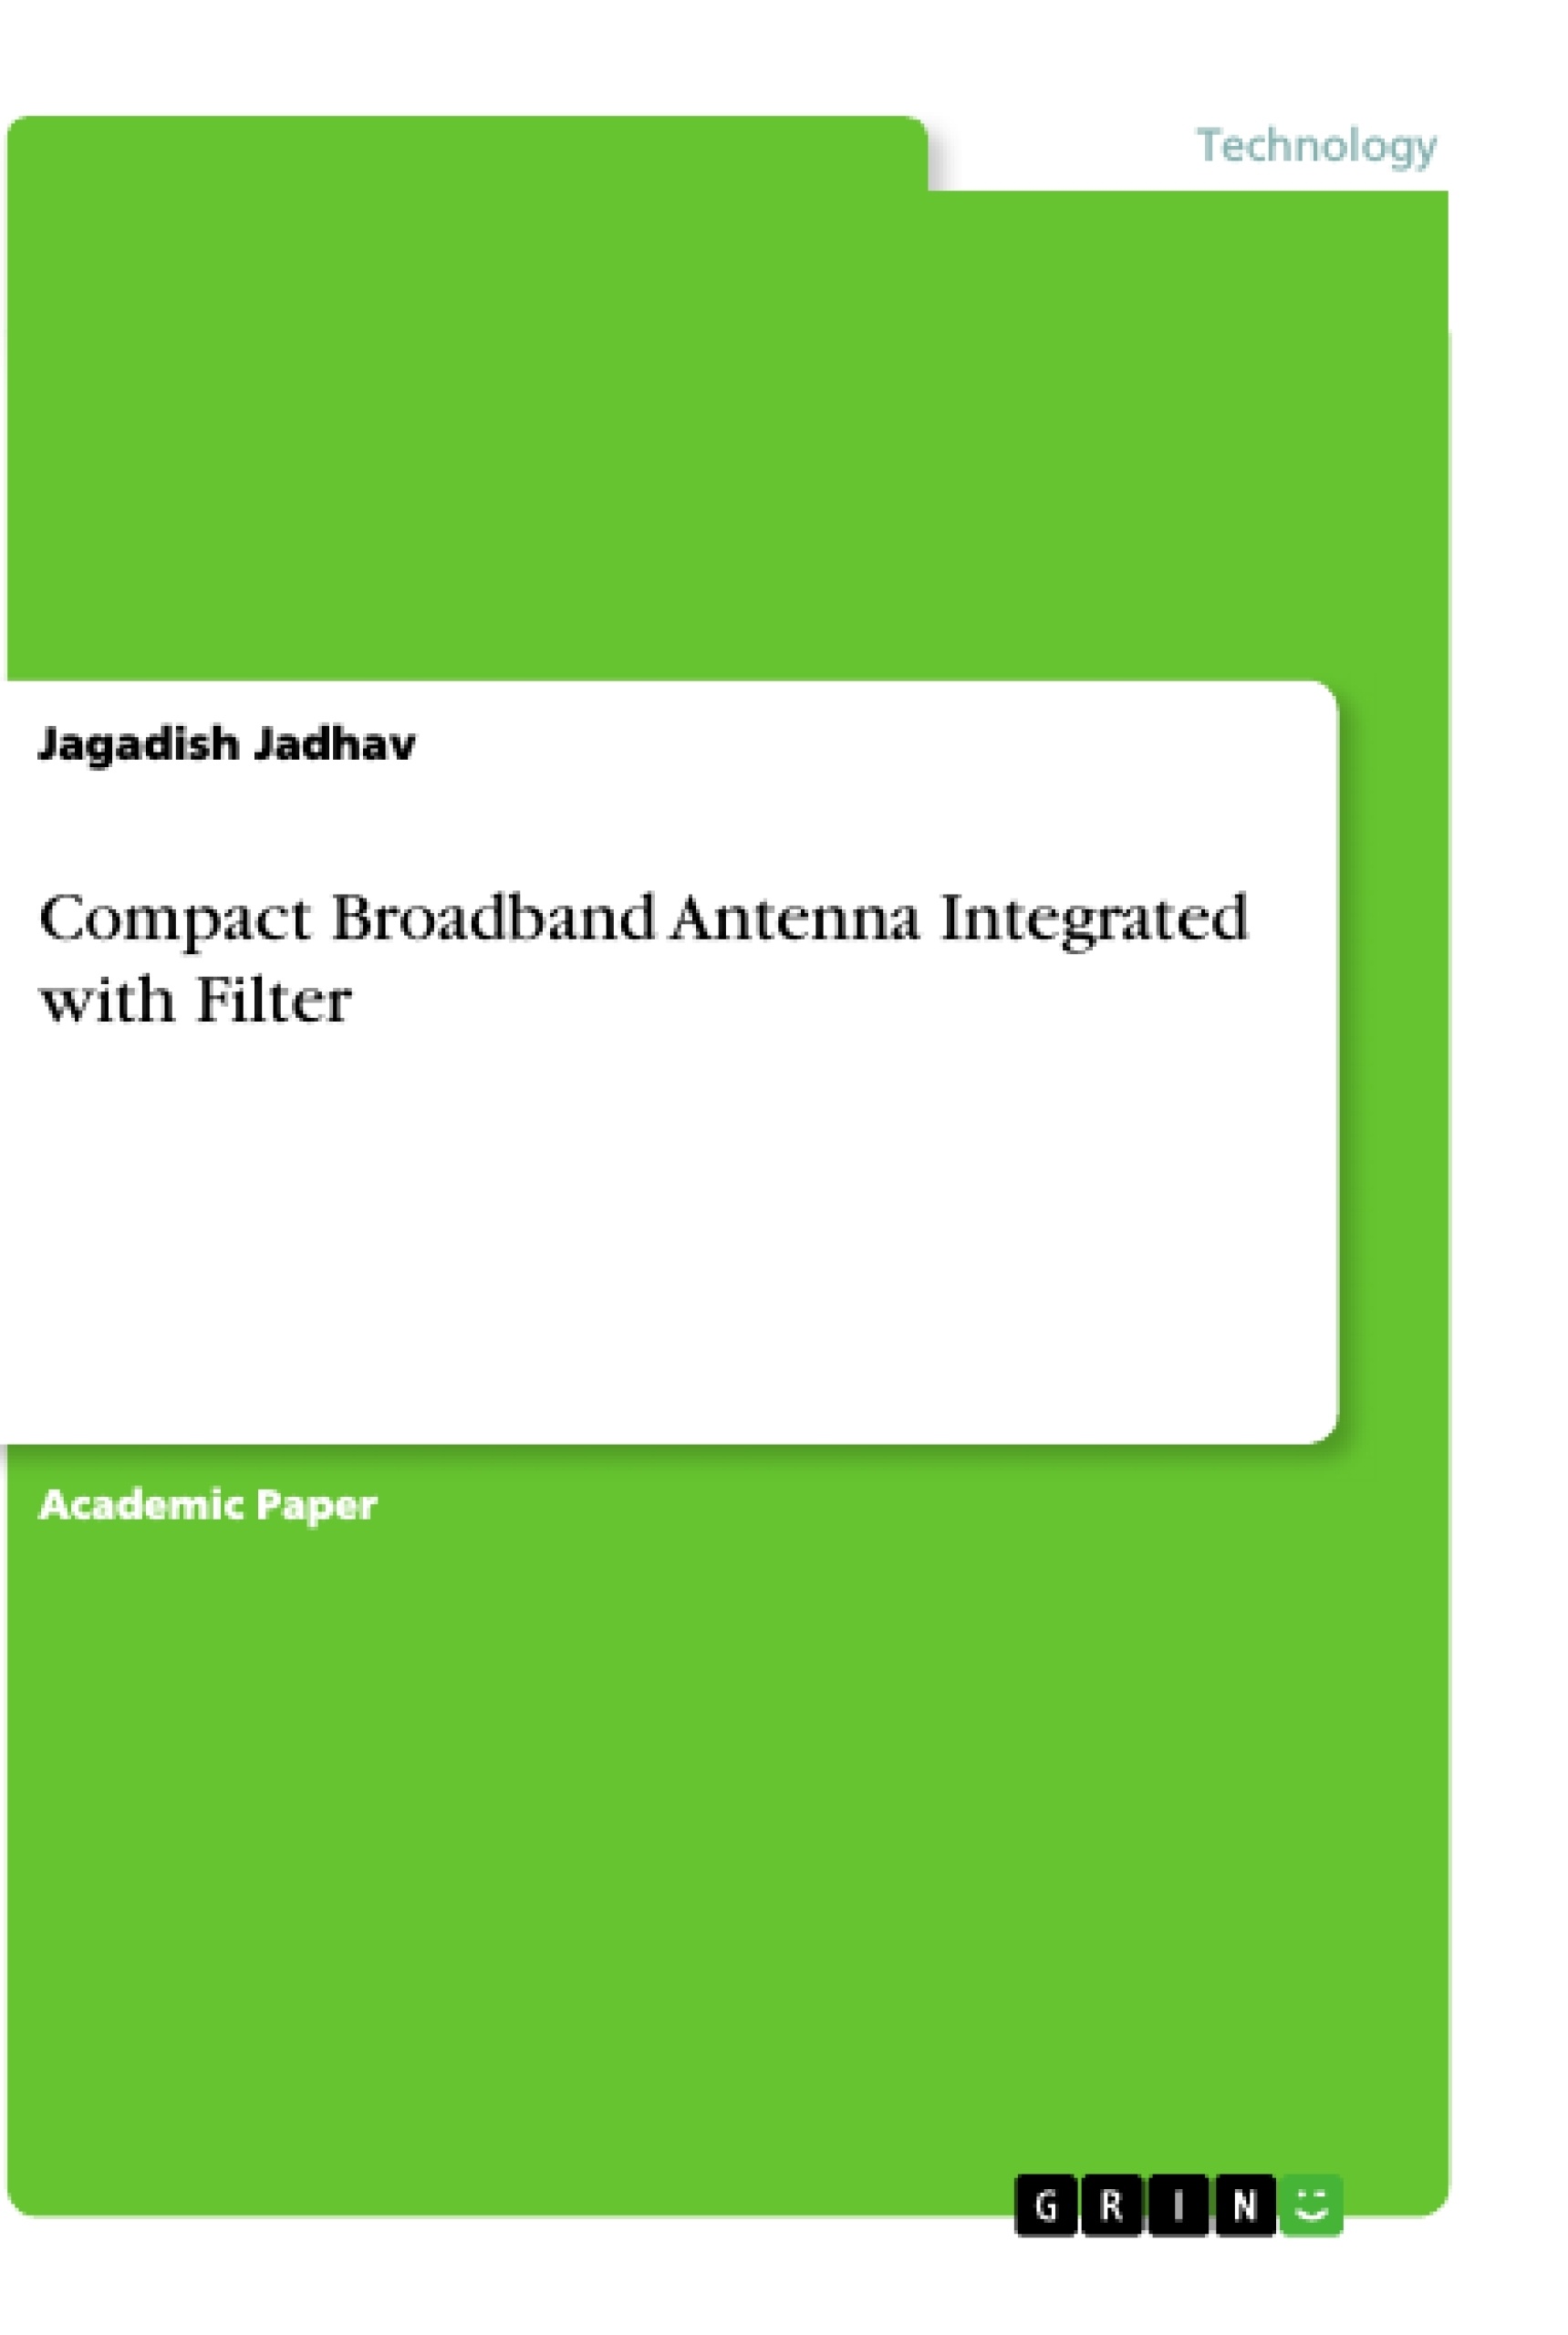 Title: Compact Broadband Antenna Integrated with Filter